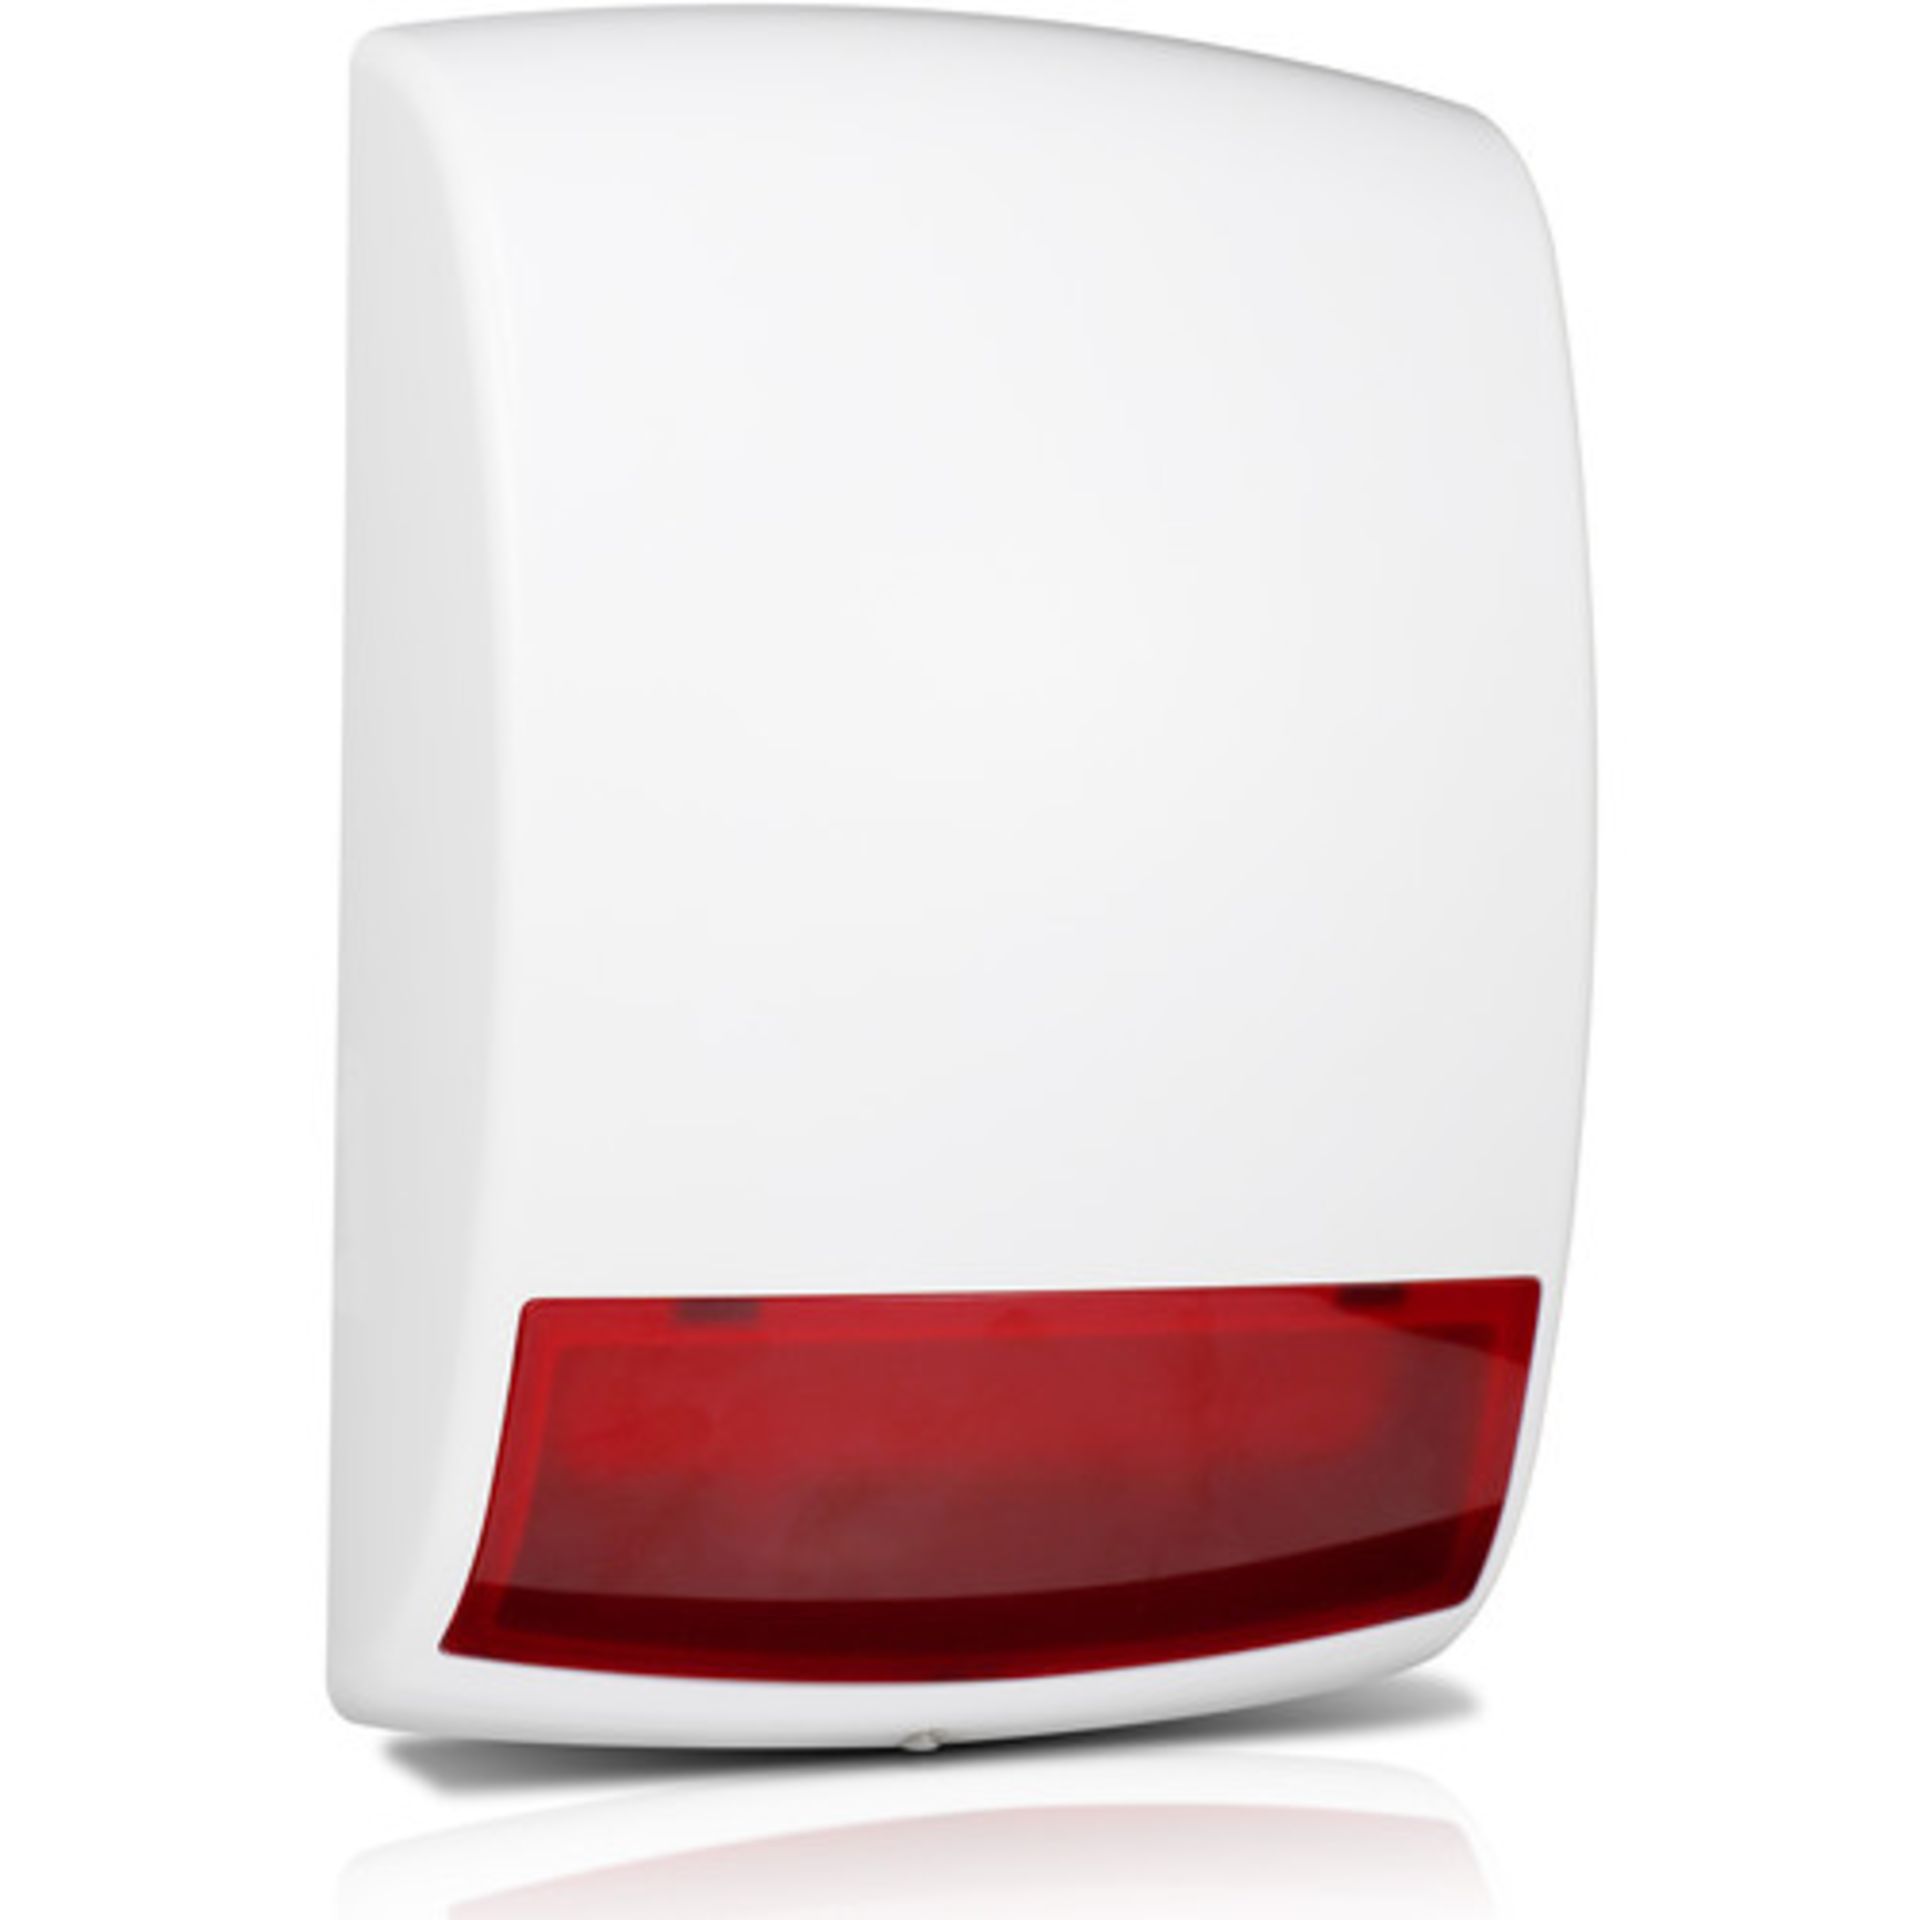 V *TRADE QTY* Grade A Swann One Outdoor Siren - Wireless Link to SwannOne Hub - 104dB Alarm - Mobile